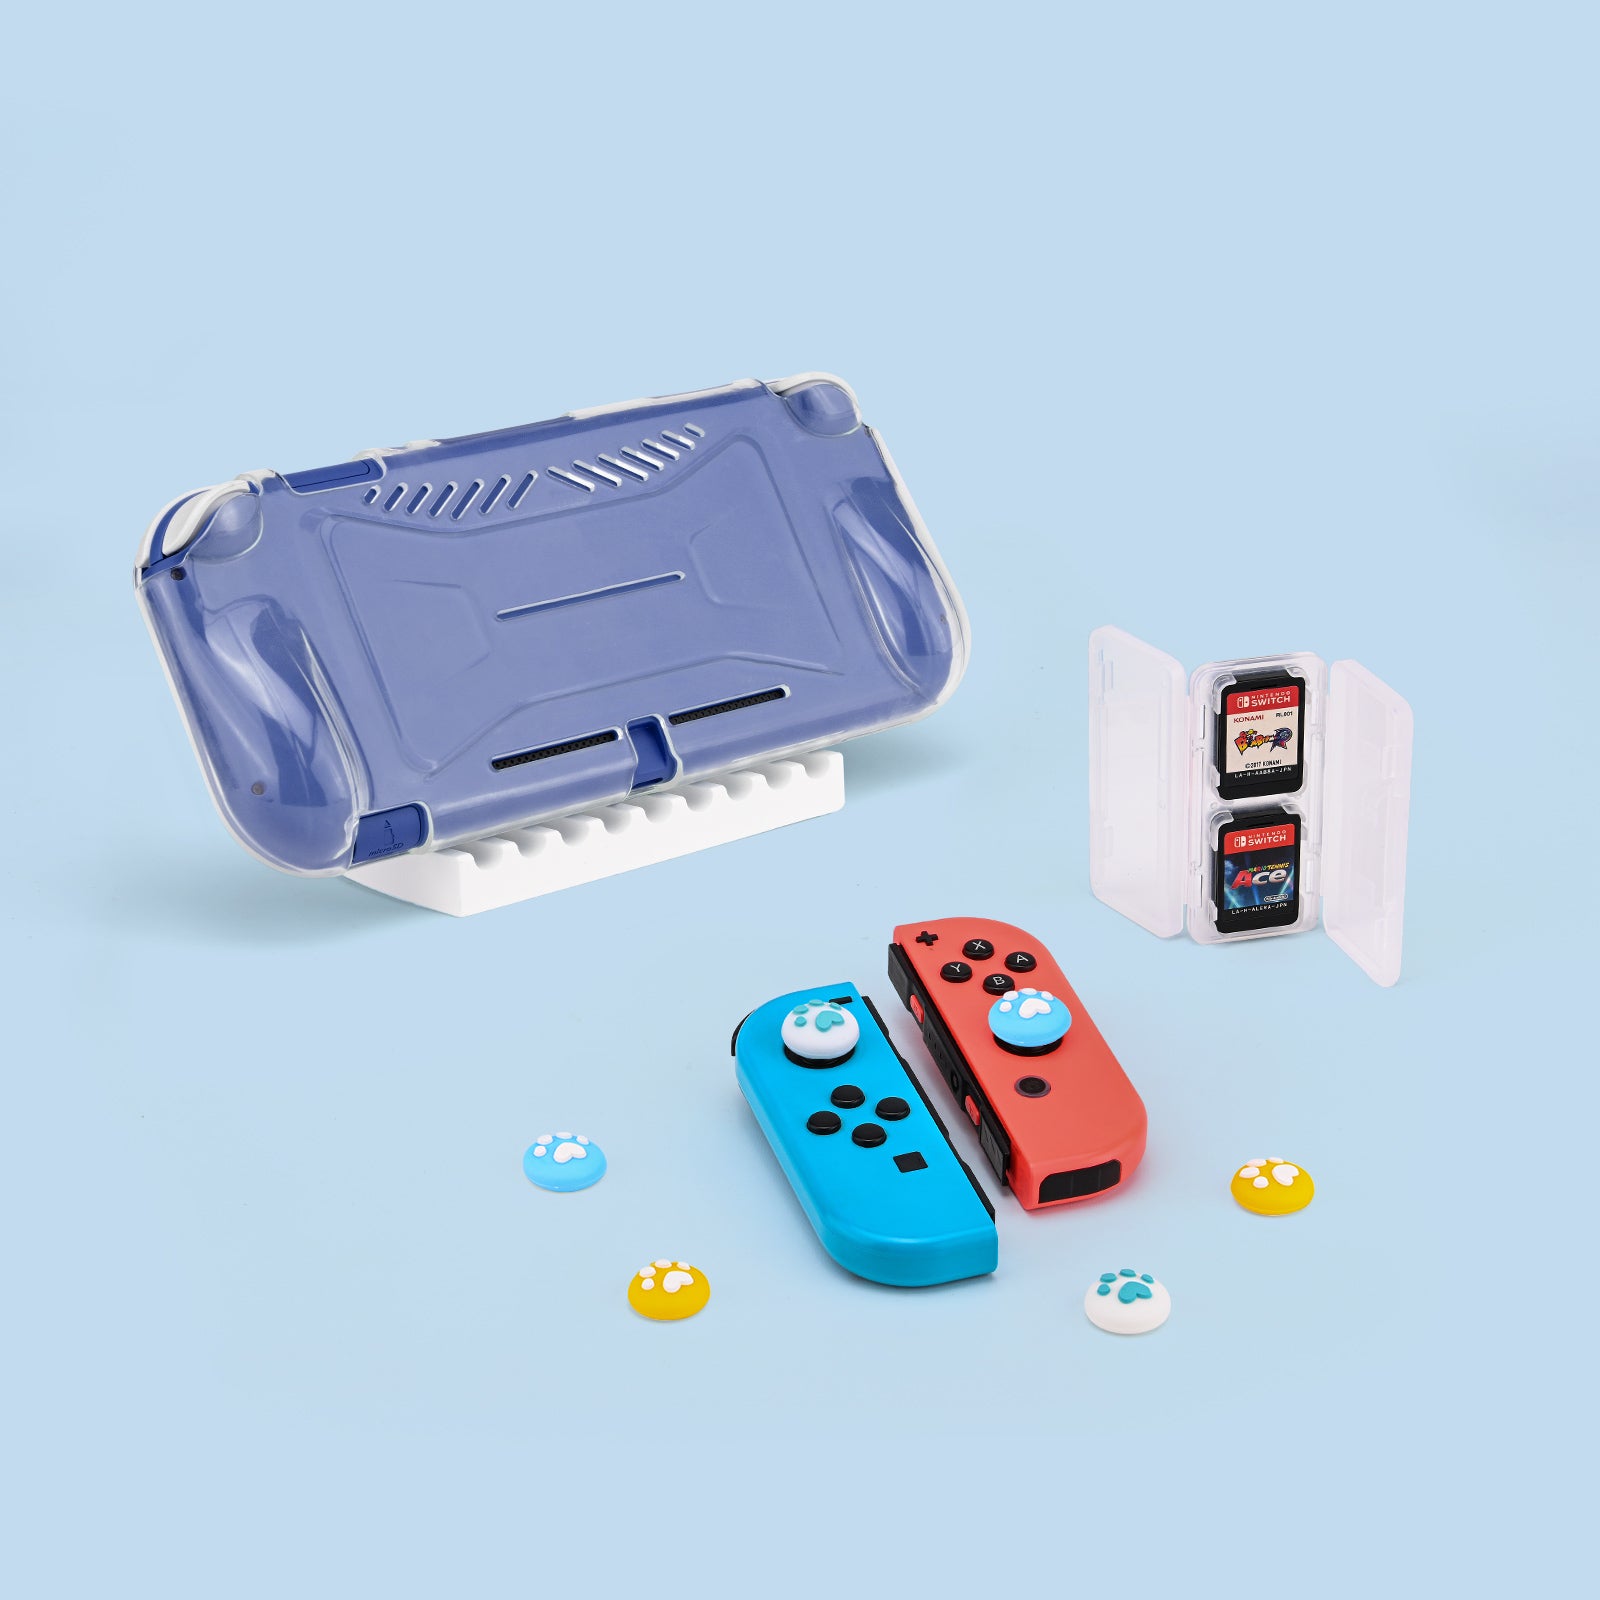 innoAura Nintendo Siwtch Lite Carrying Case with 17 Accessories Switch Lite Cover